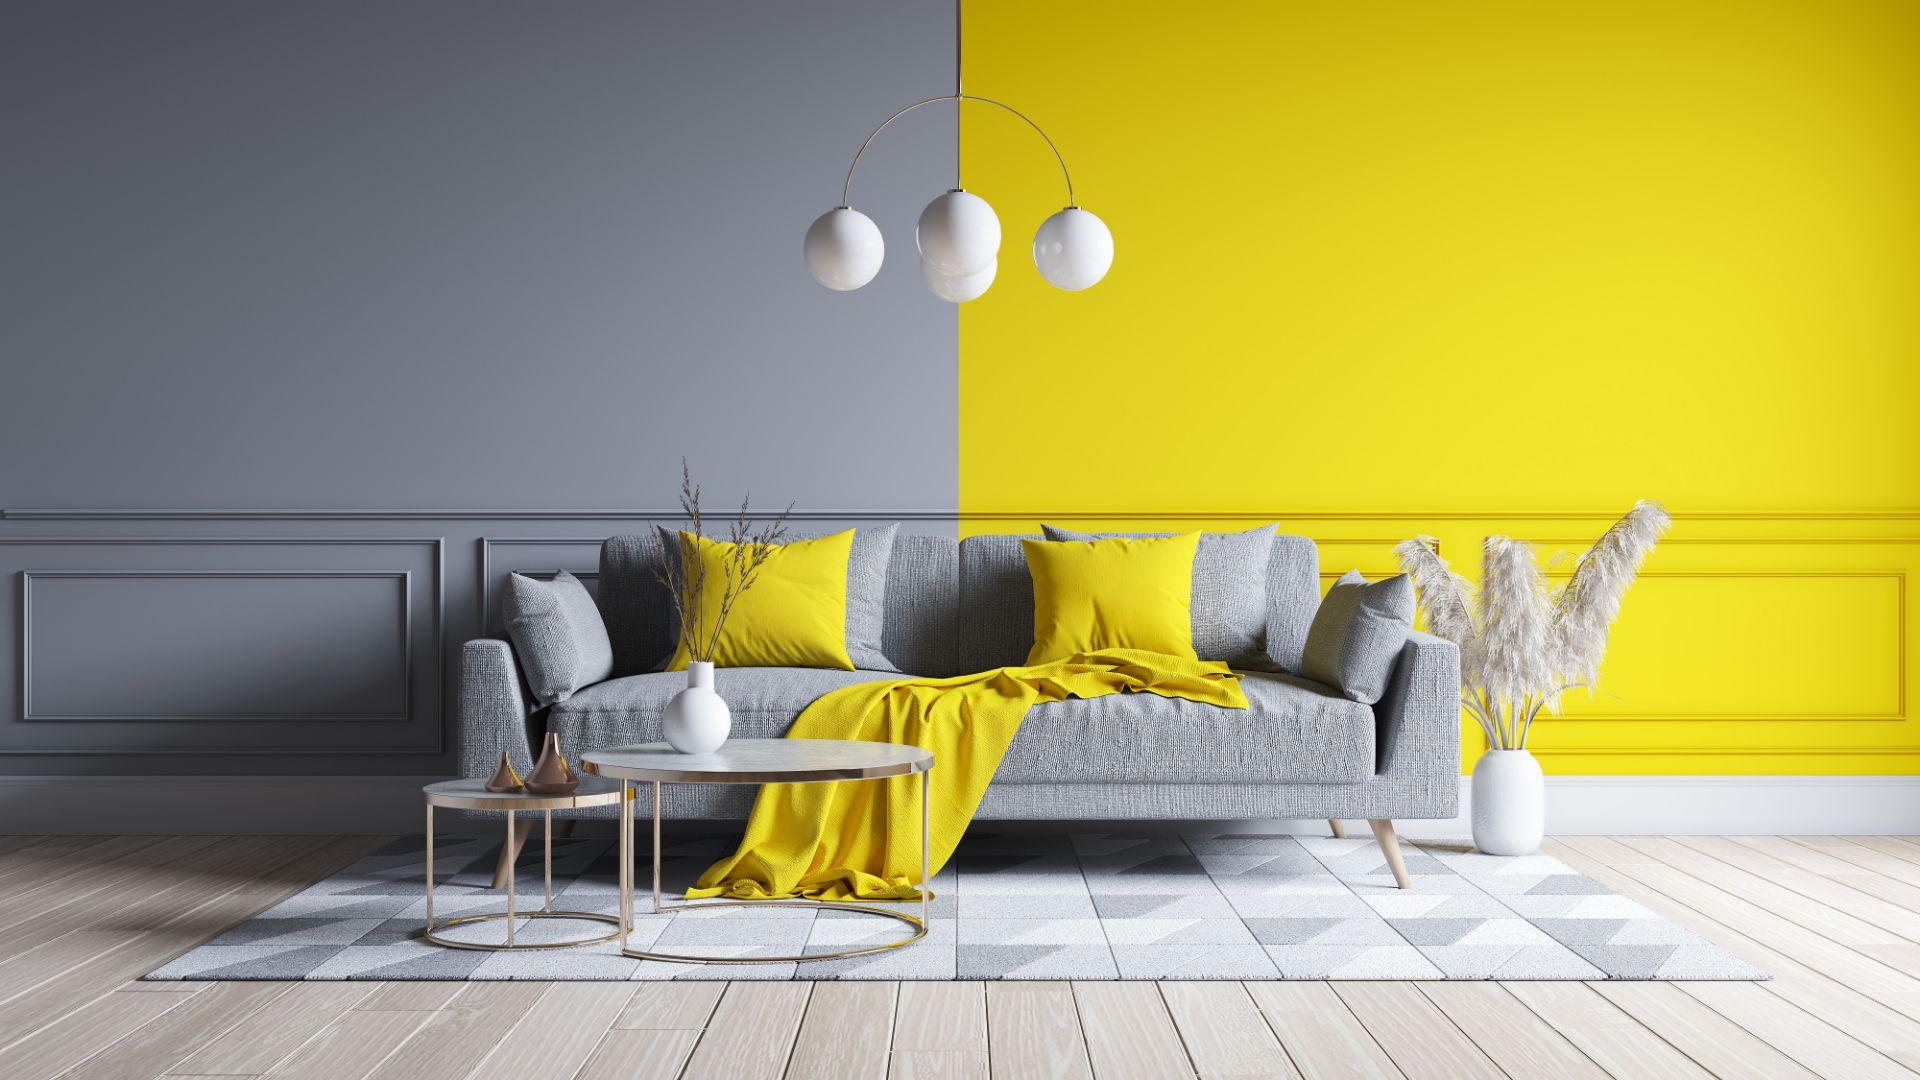 Gray and yellow painted room